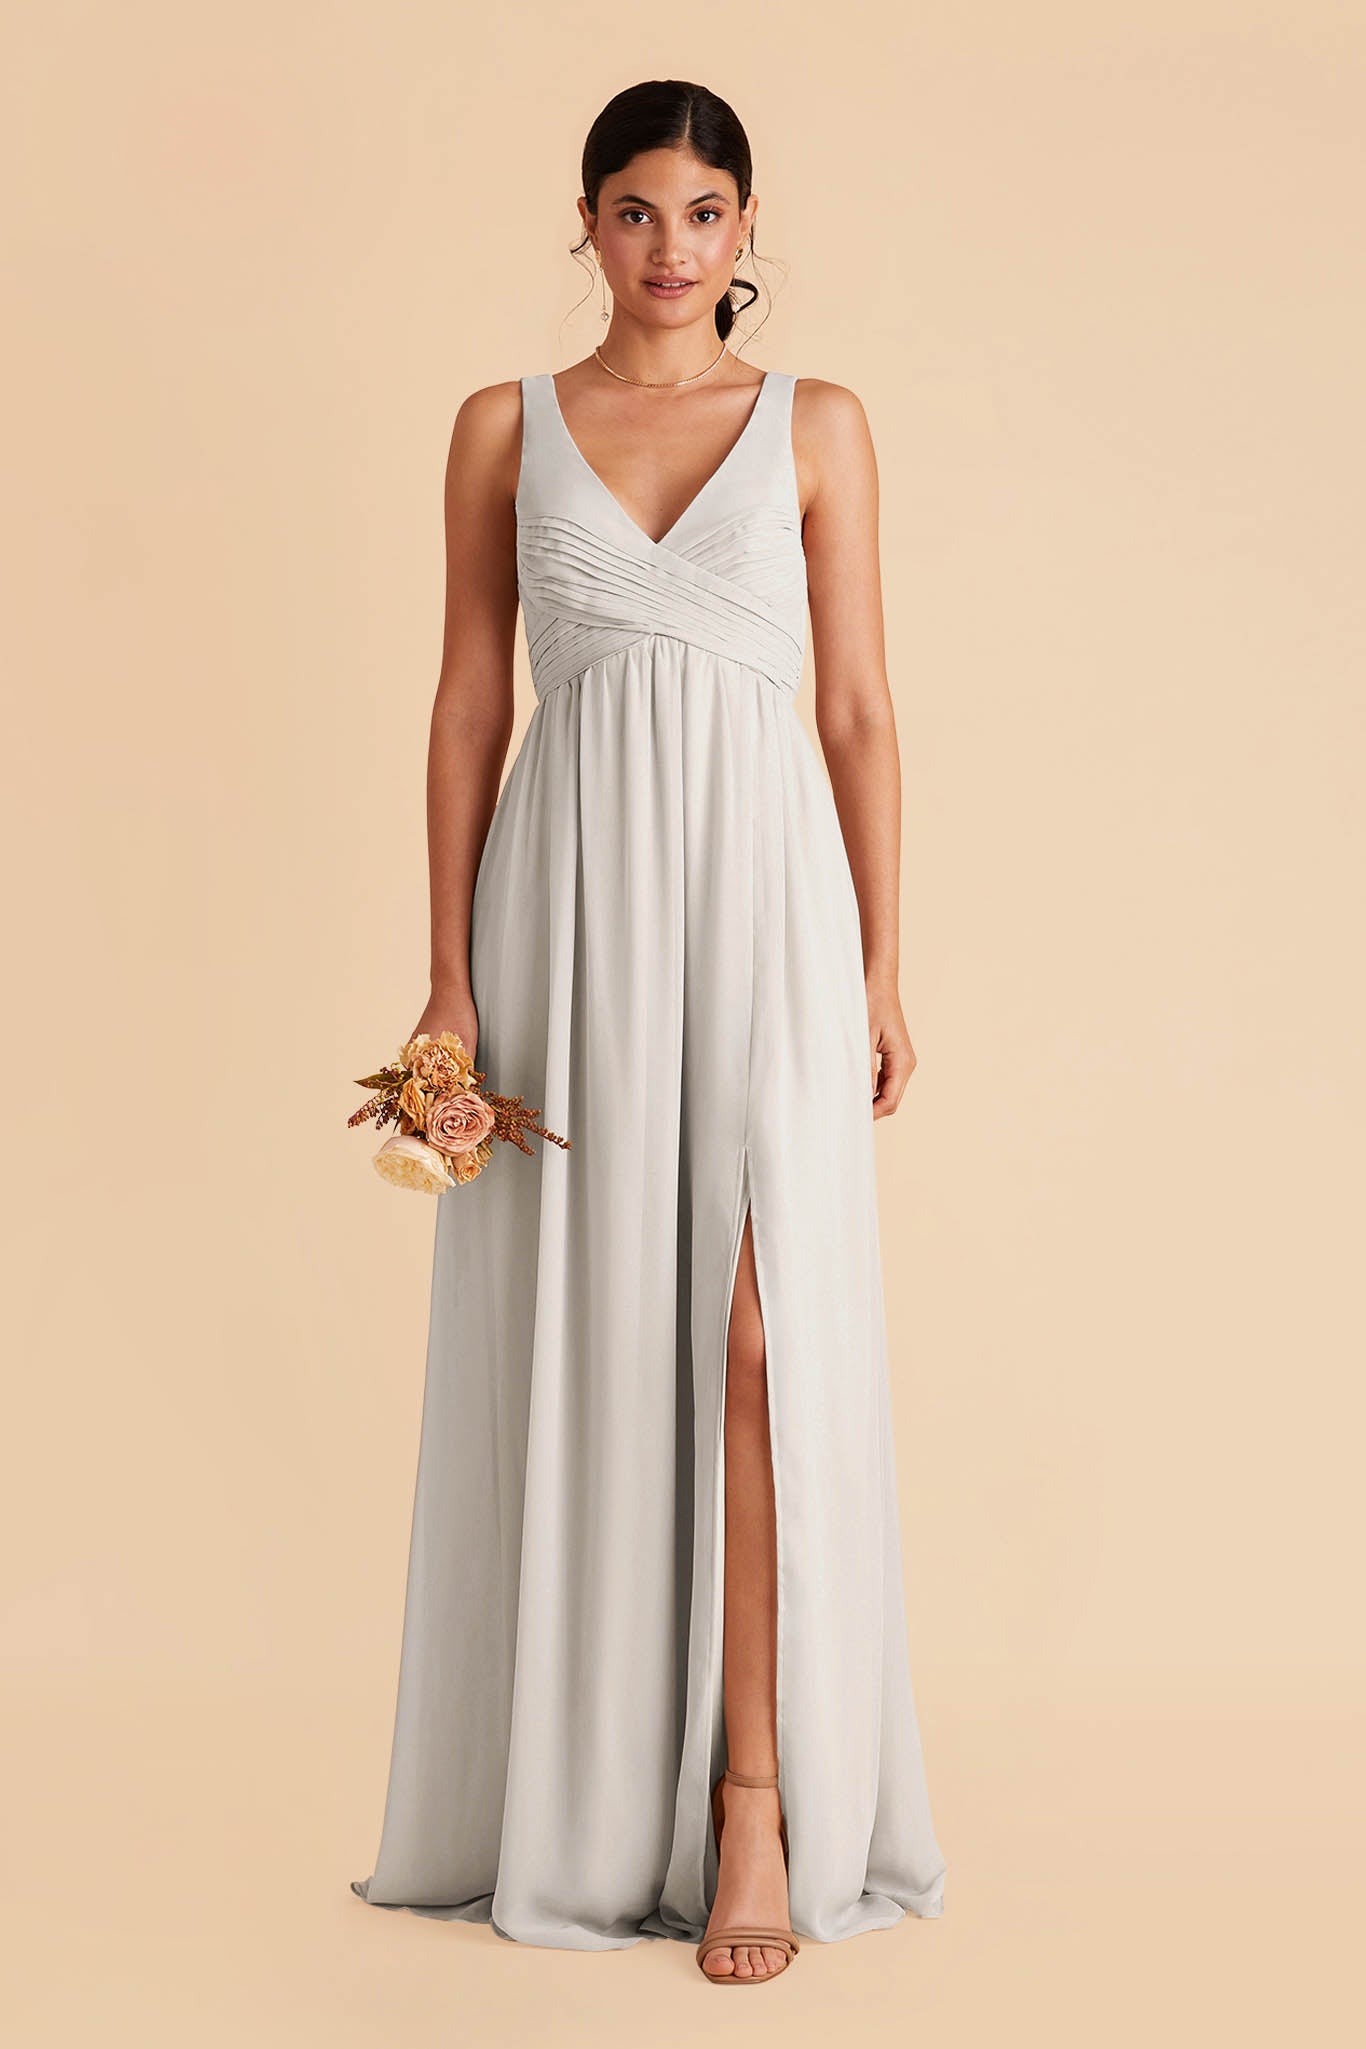 Dove Gray Laurie Empire Dress by Birdy Grey